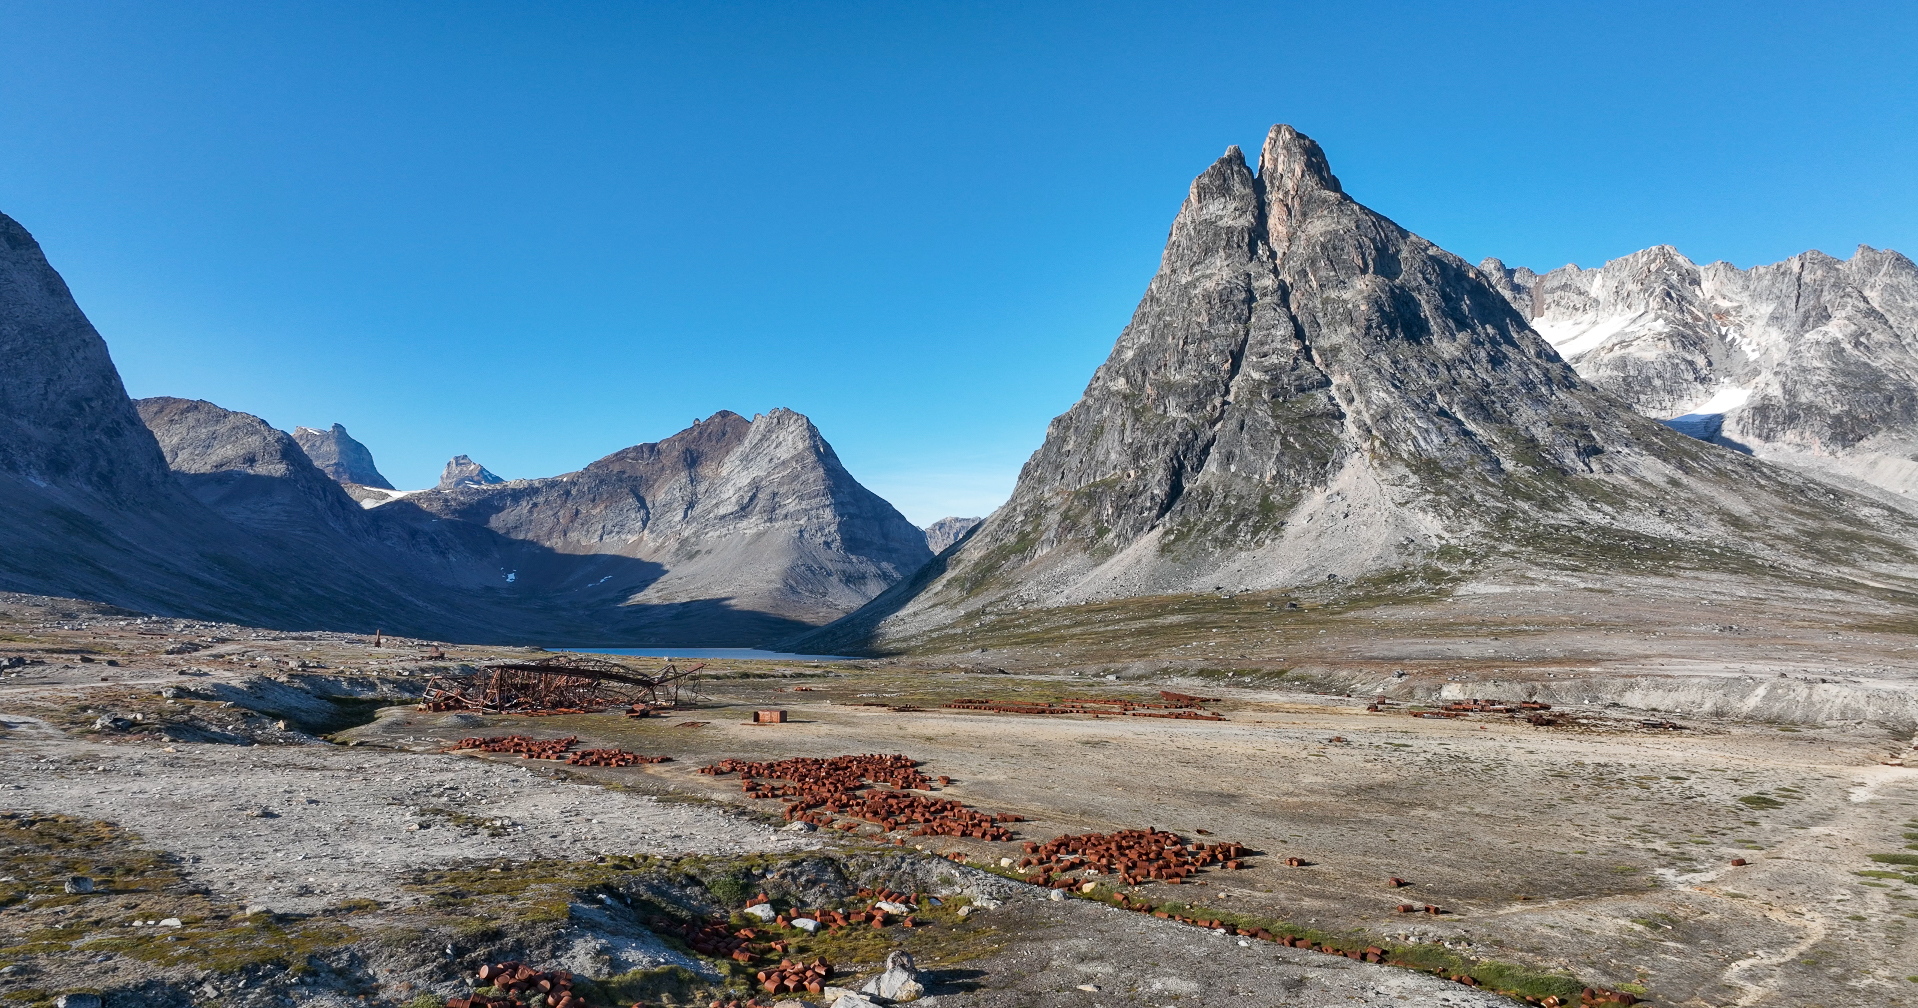 View over Ikateq with mountain views rising behind the flat land. Photo by Anna & Lucas Jahn - Visit East Greenland